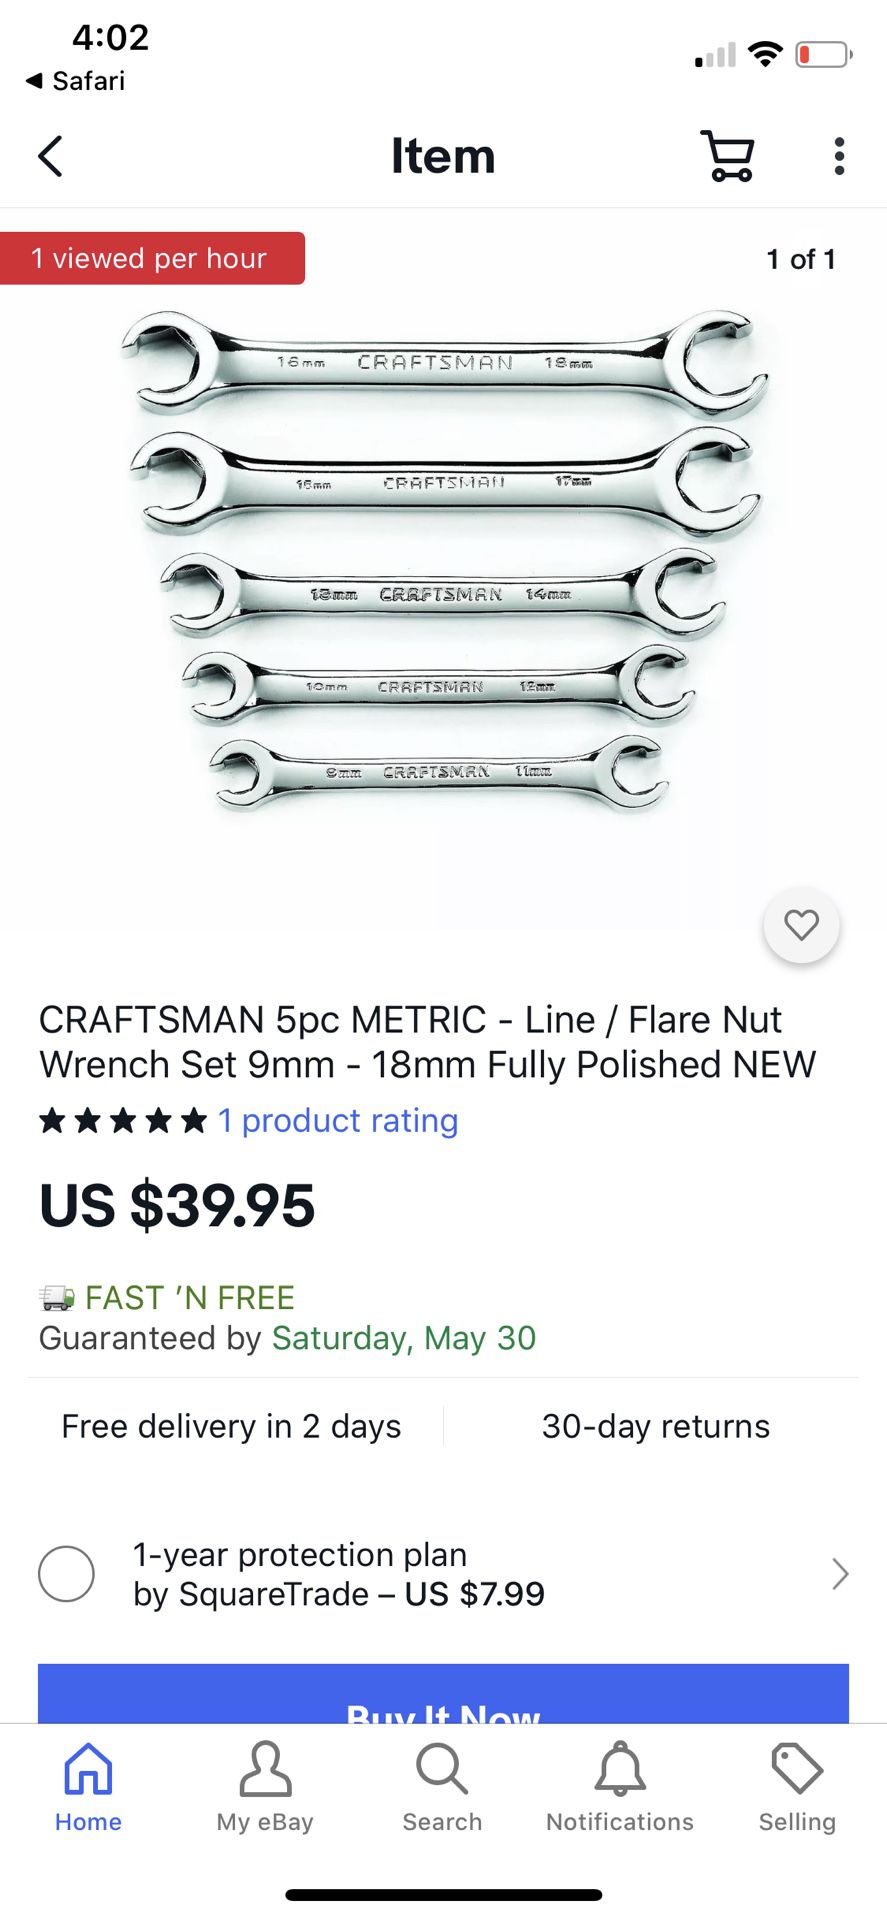 CRAFTSMAN 5pc METRIC - Line / Flare Nut Wrench Set 9mm - 18mm Fully Polished NEW